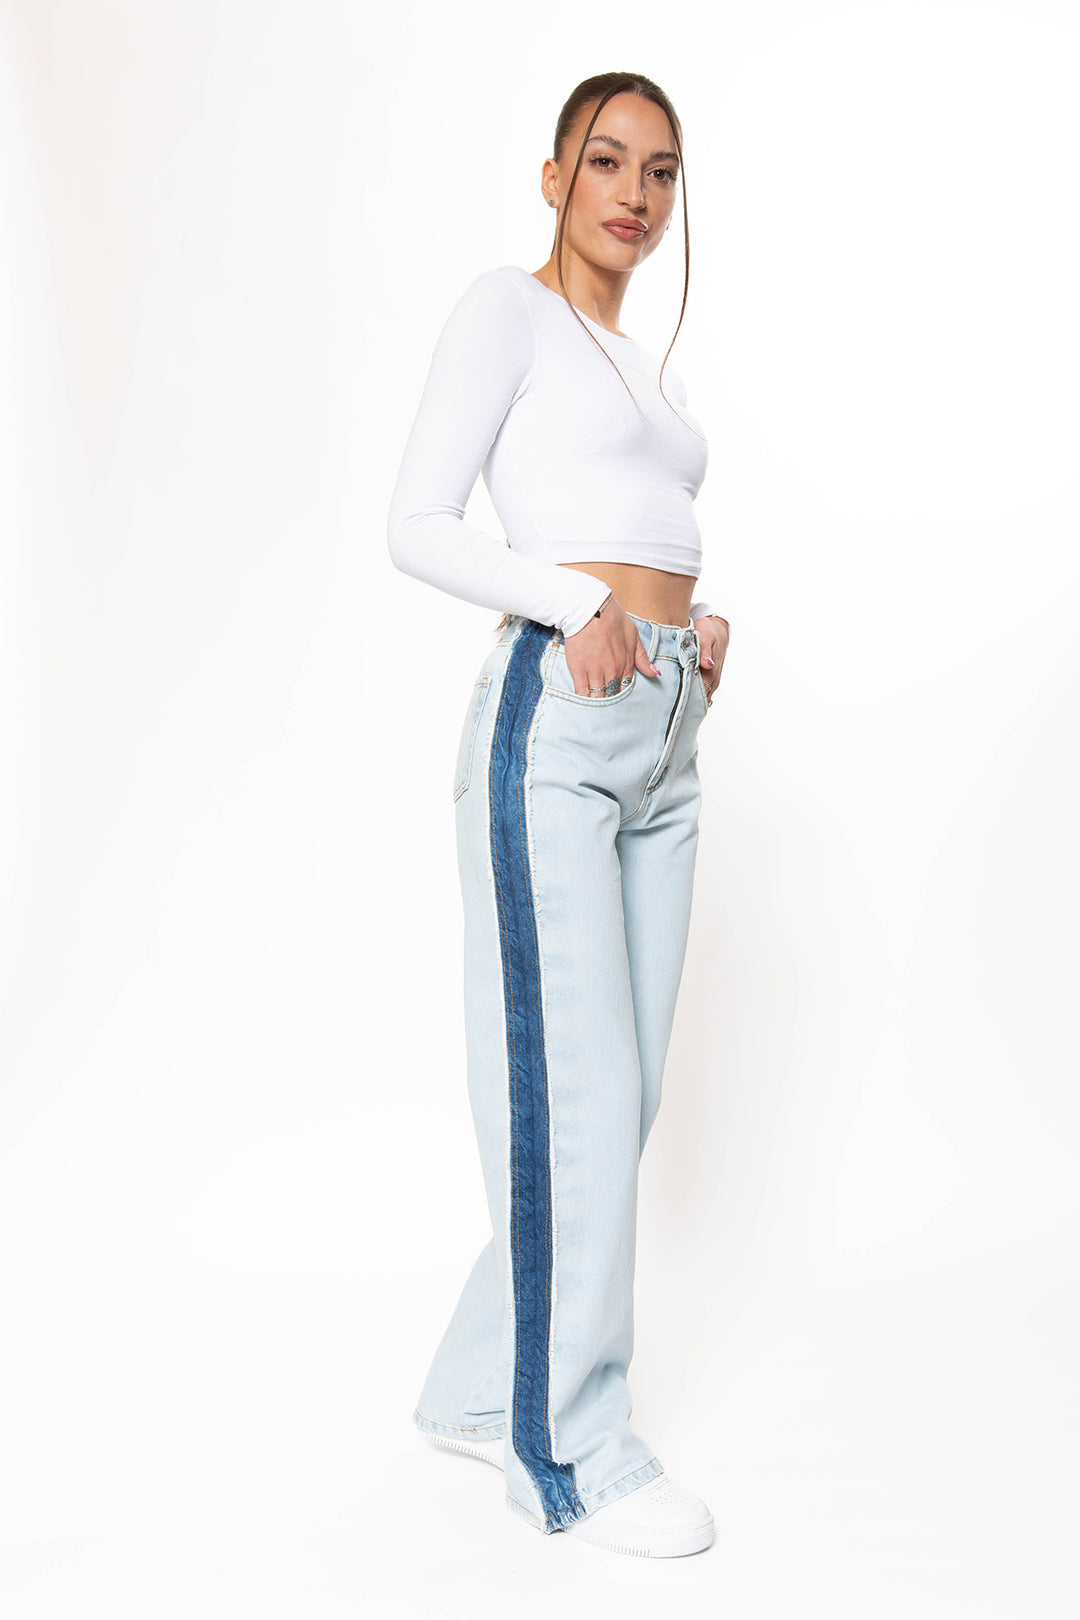 Serenity Fringe Straight Leg Jeans Jeans Routines Fashion   